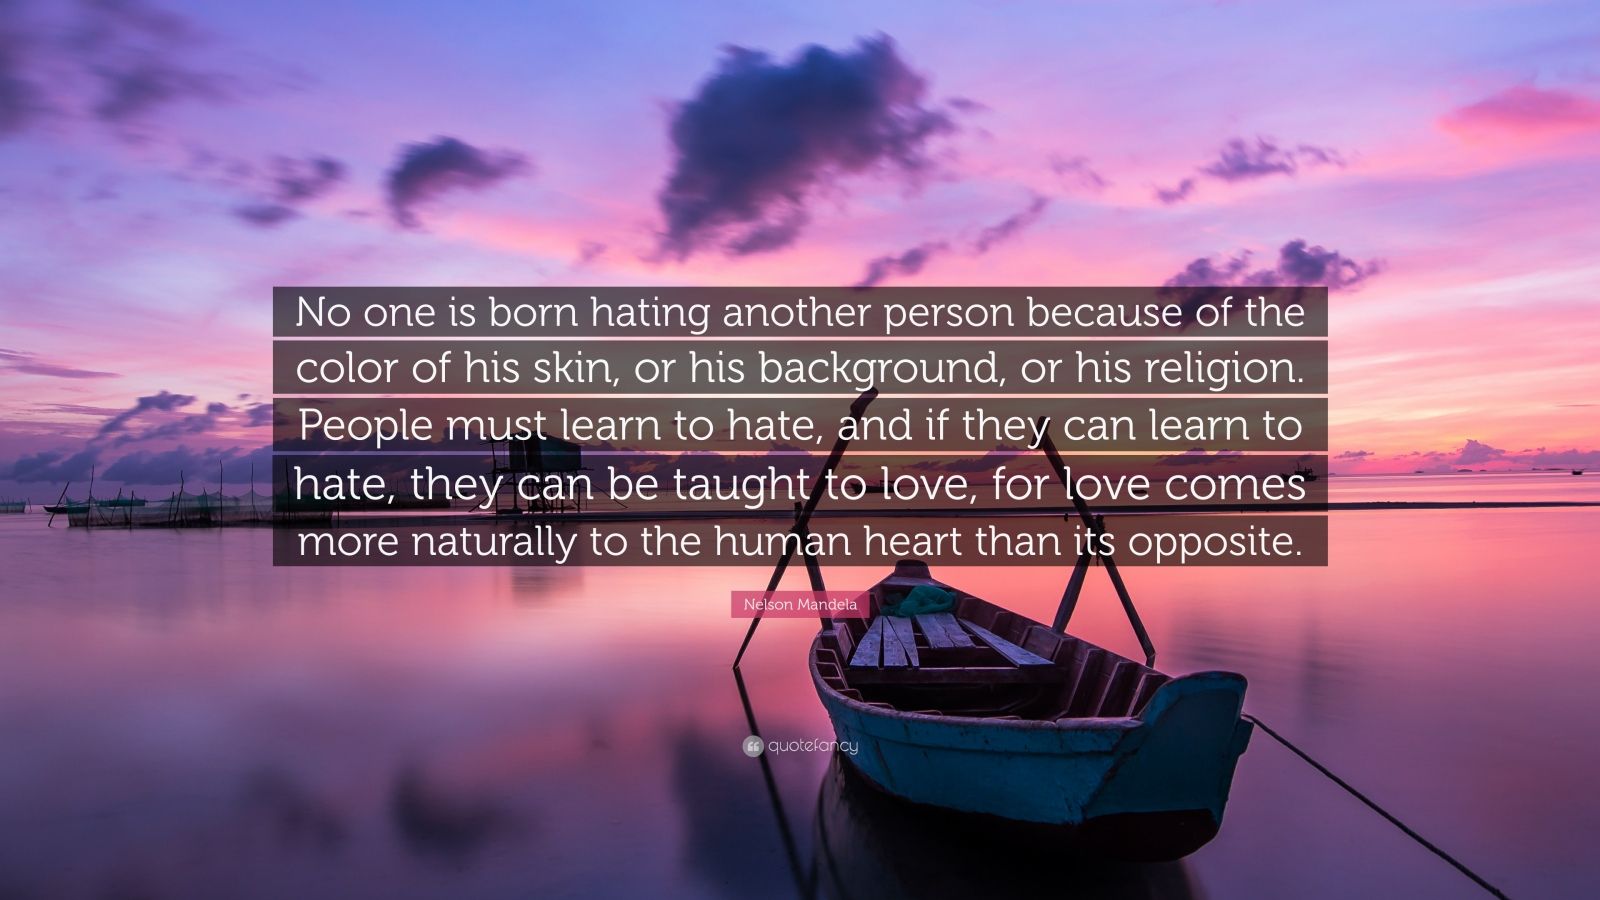 Nelson Mandela Quote: “No one is born hating another person because of